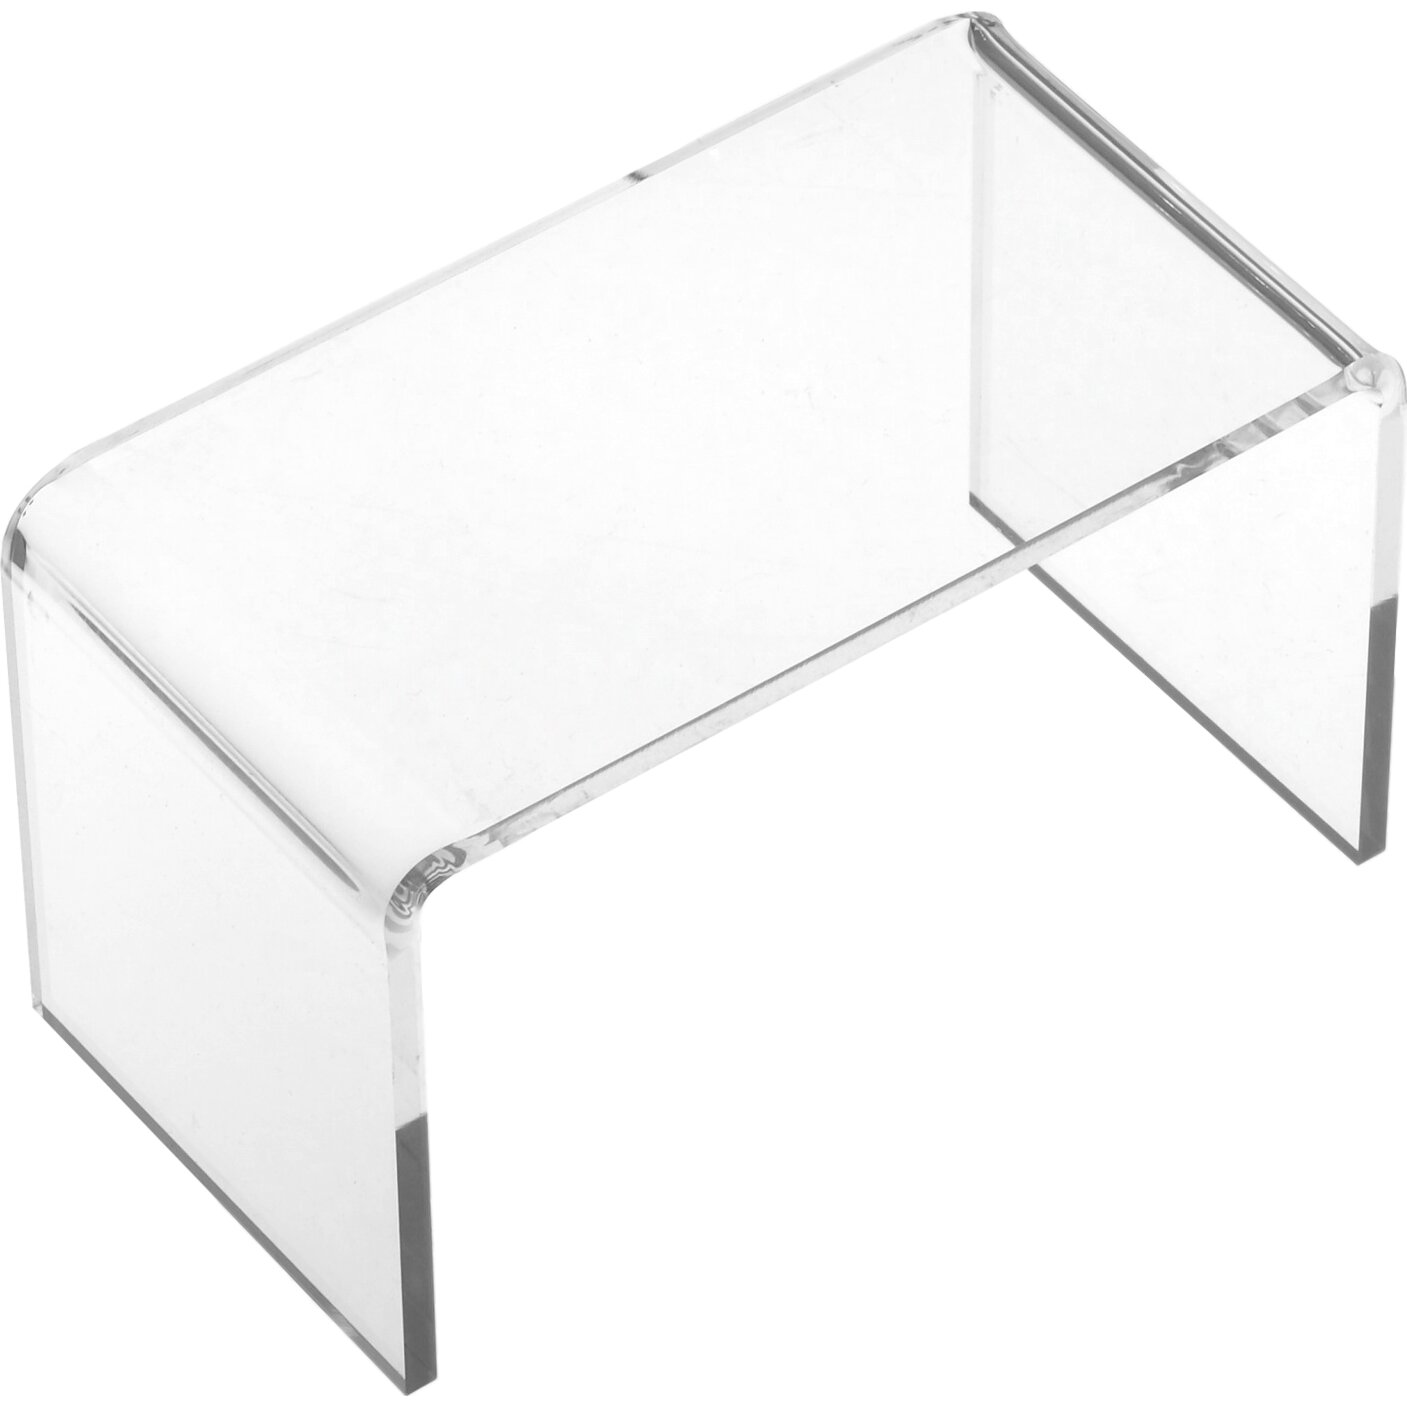 3 White Faux Leather Ring Square Base Finger Displays and 3 Acrylic Jewelry Display Risers